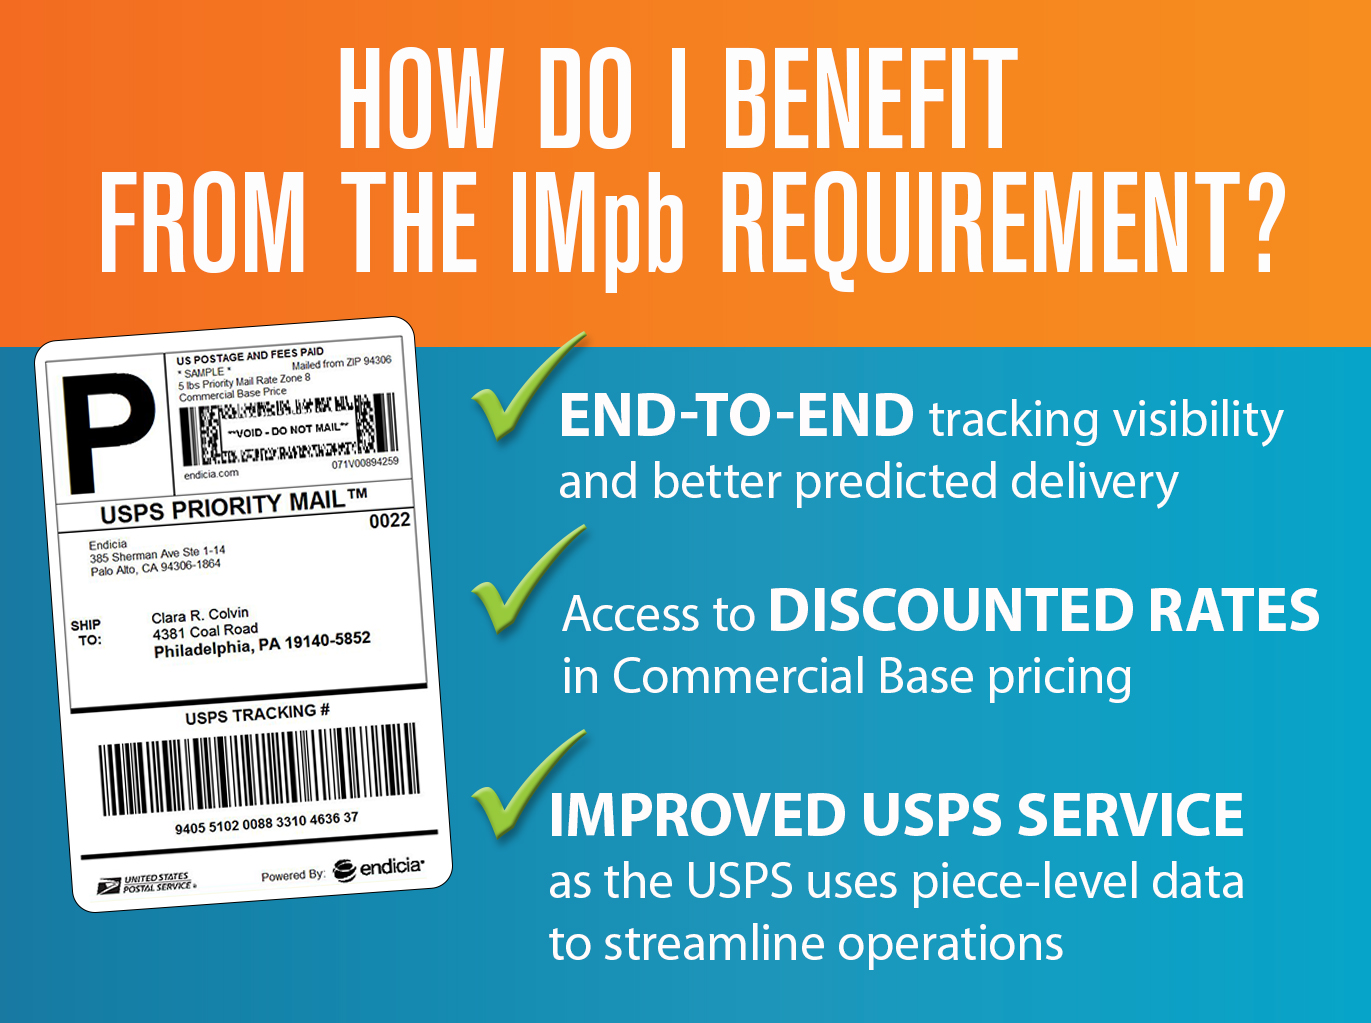 Intelligent mail Barcode. USPS Barcode. Private Label Amazon Registration. Tracking barcode